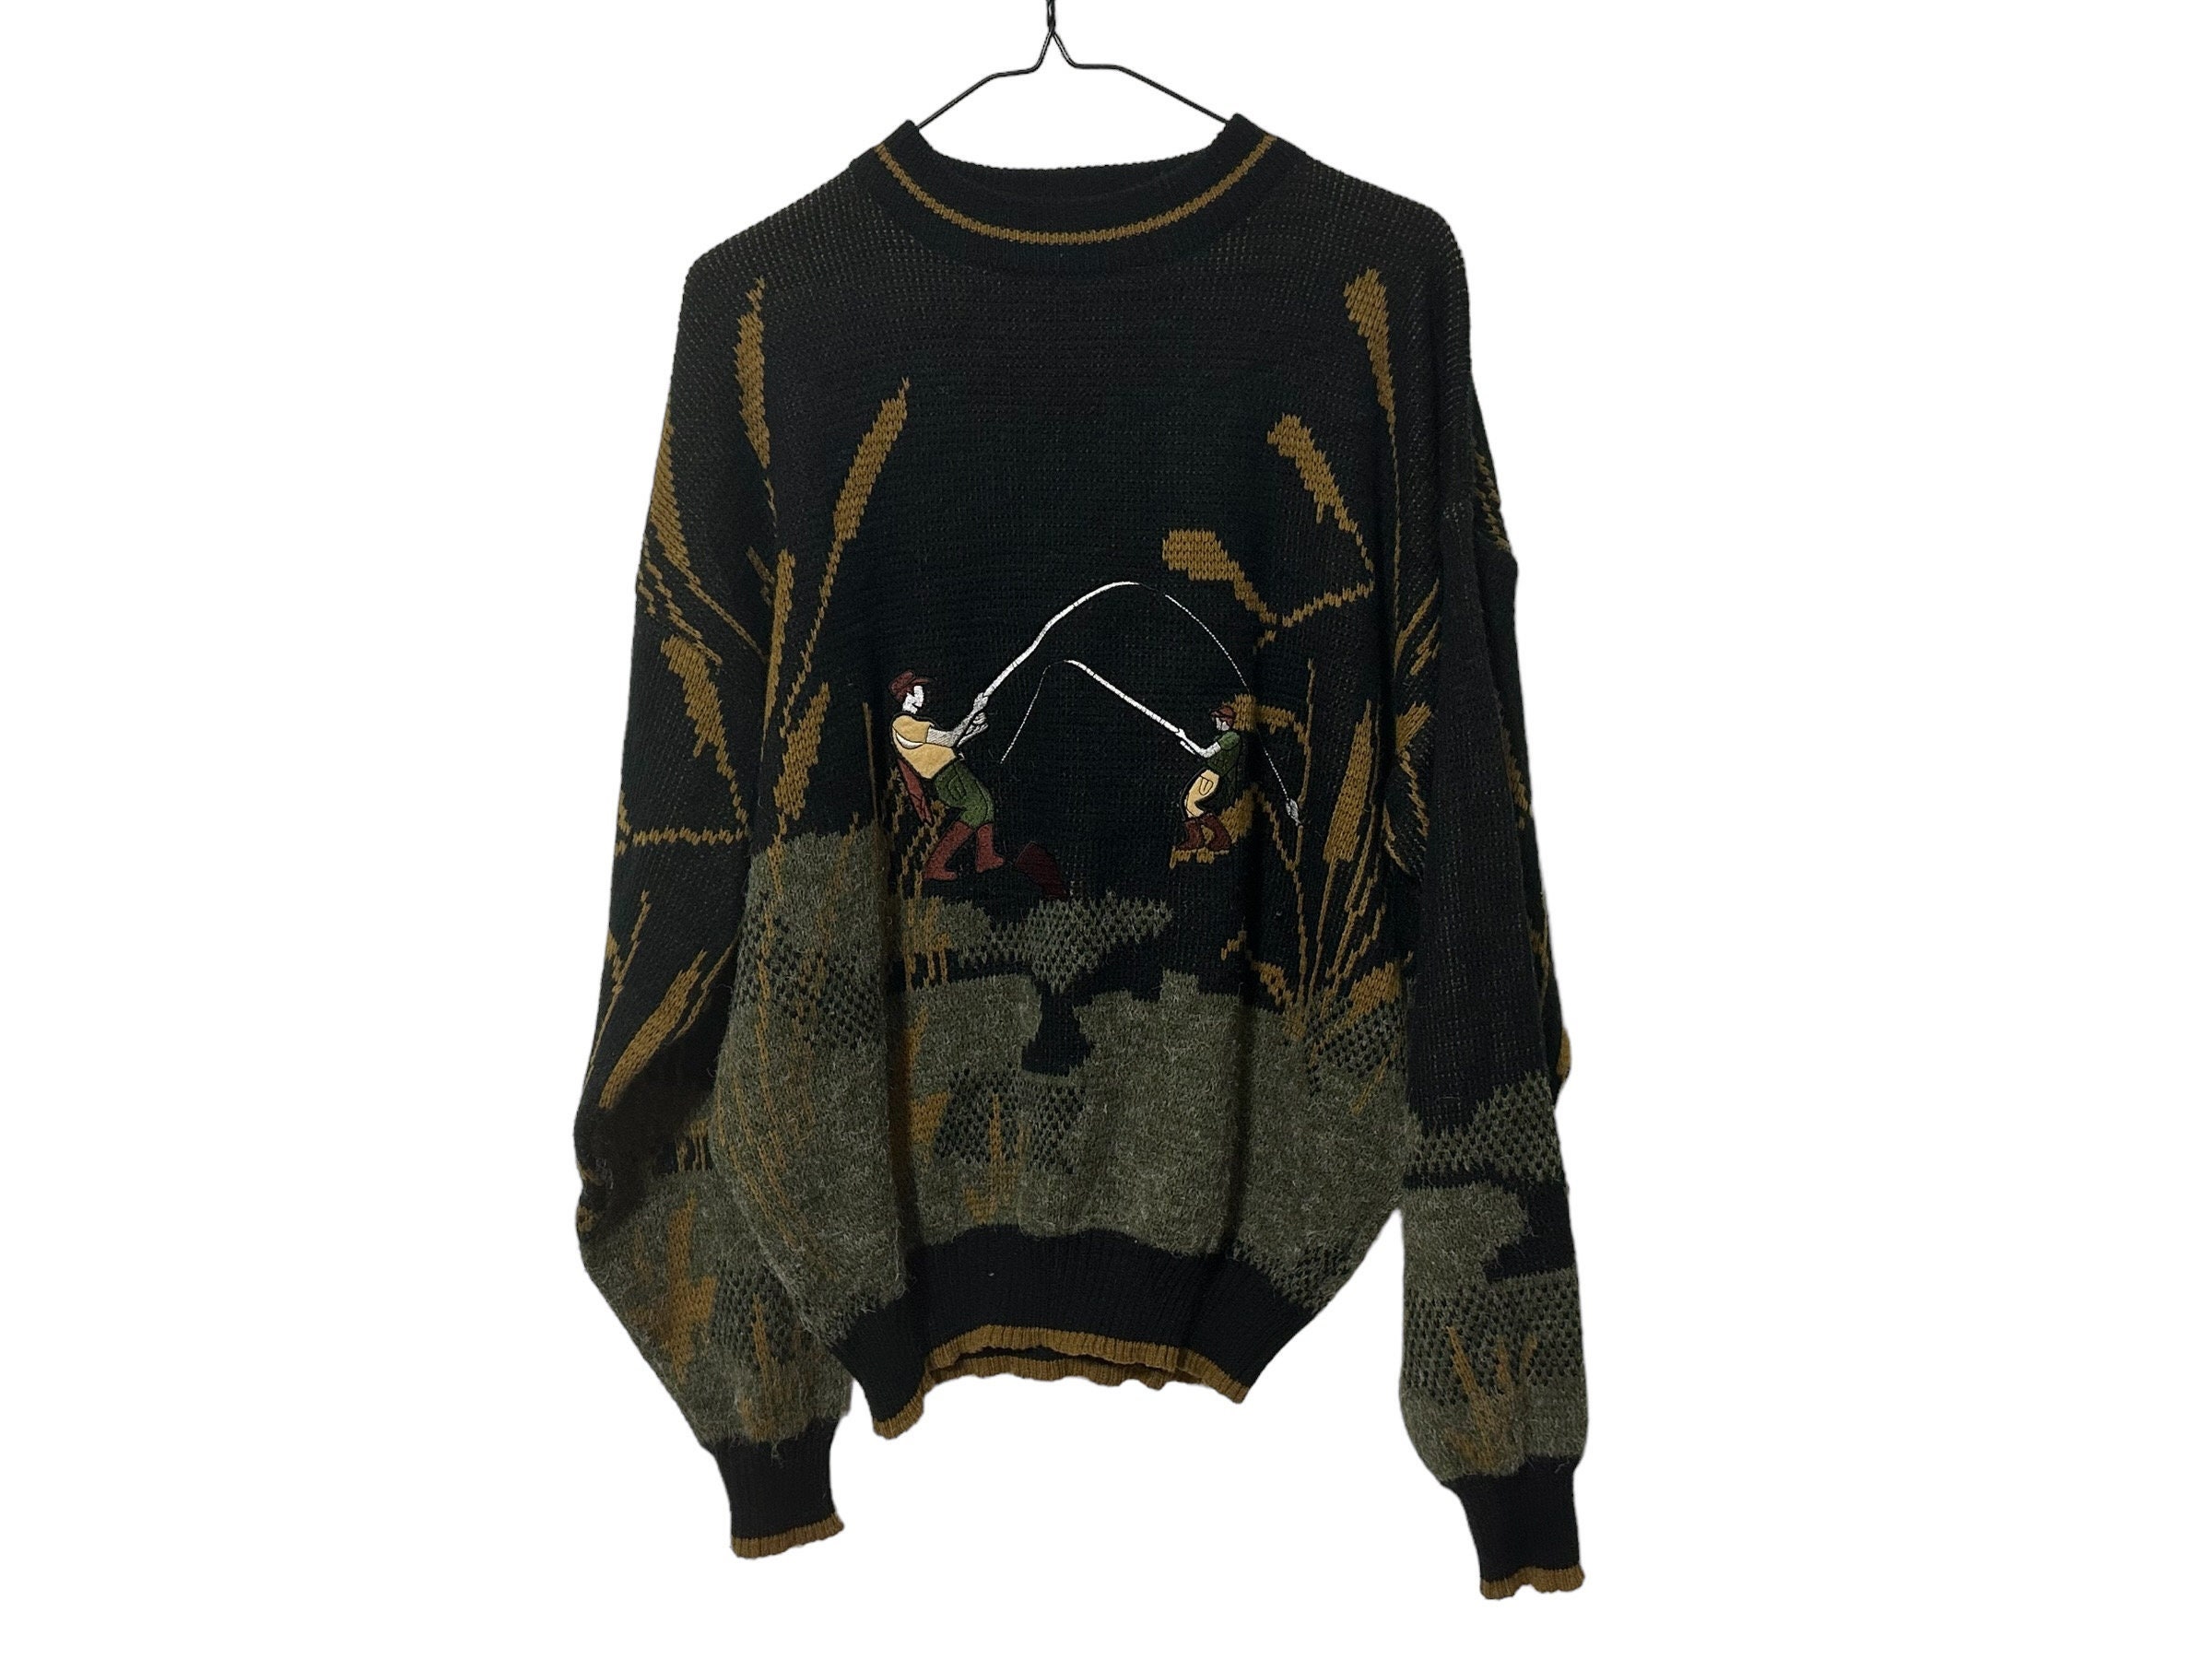 Vintage Fly Fishing Sweater for Men Pagliano Fisherman Graphic